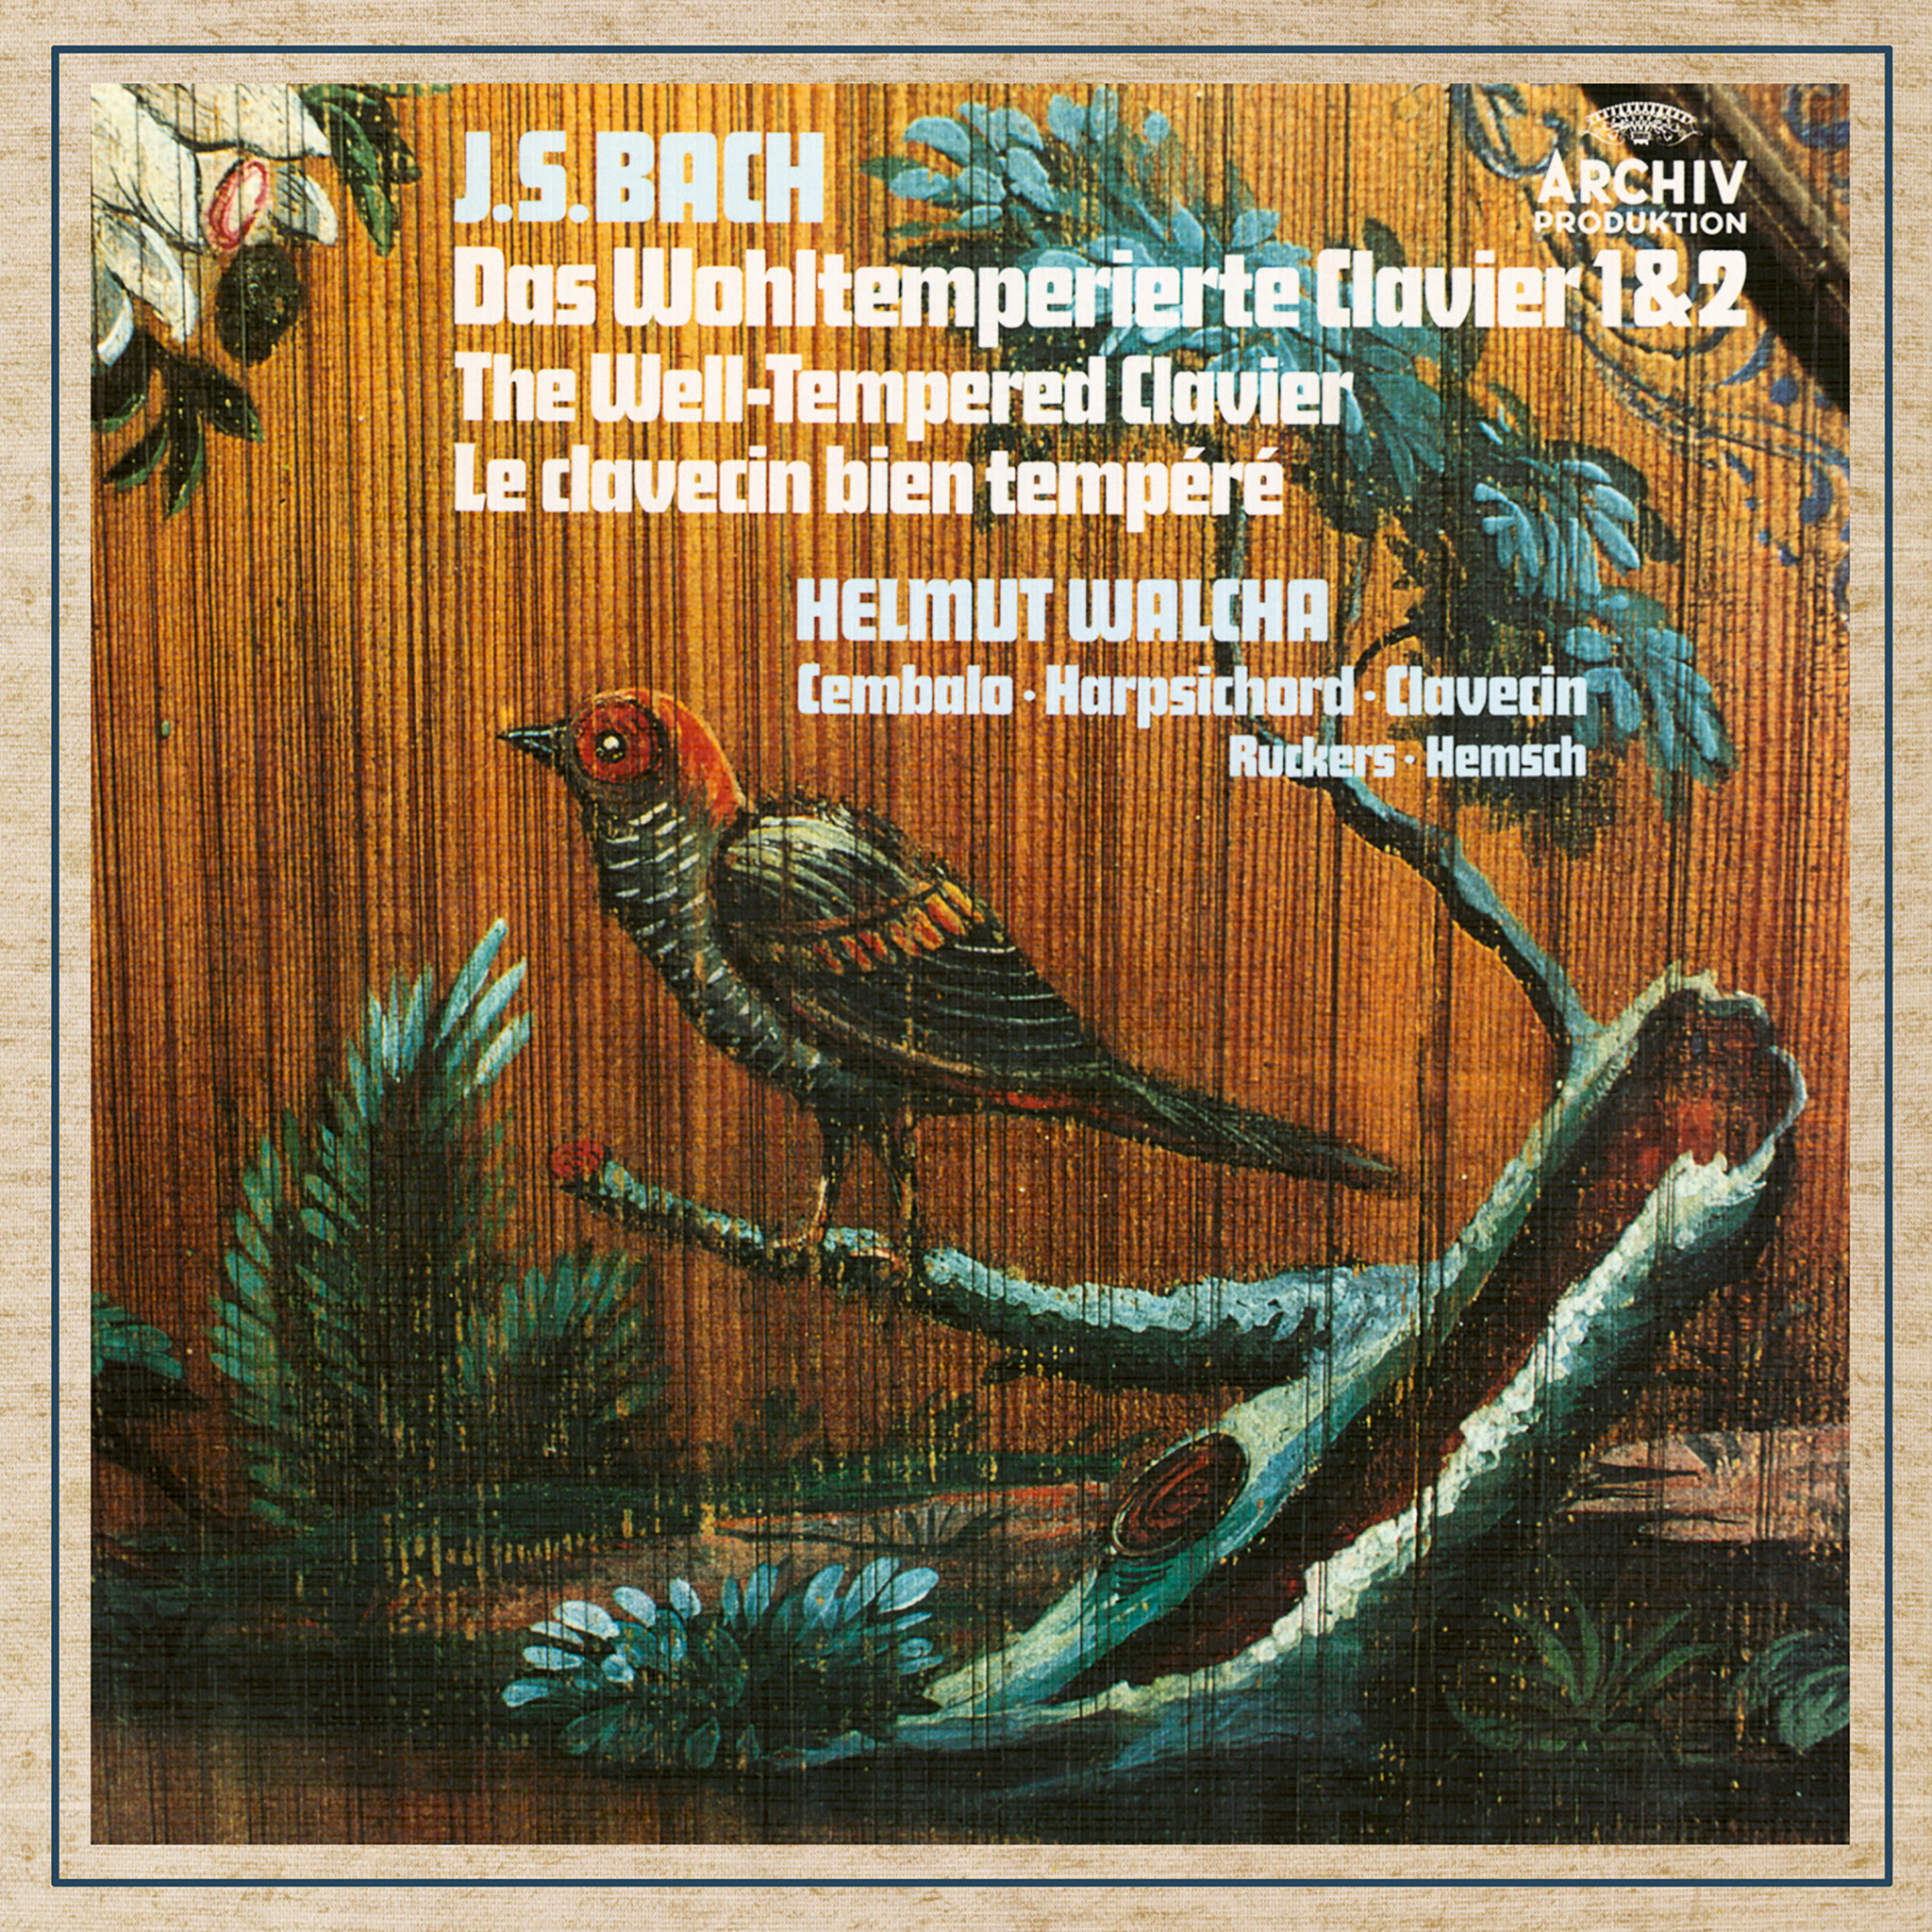 Helmut Walcha - Bach, J.S.: The Well-Tempered Clavier BWV 846-893 eAlbum Cover